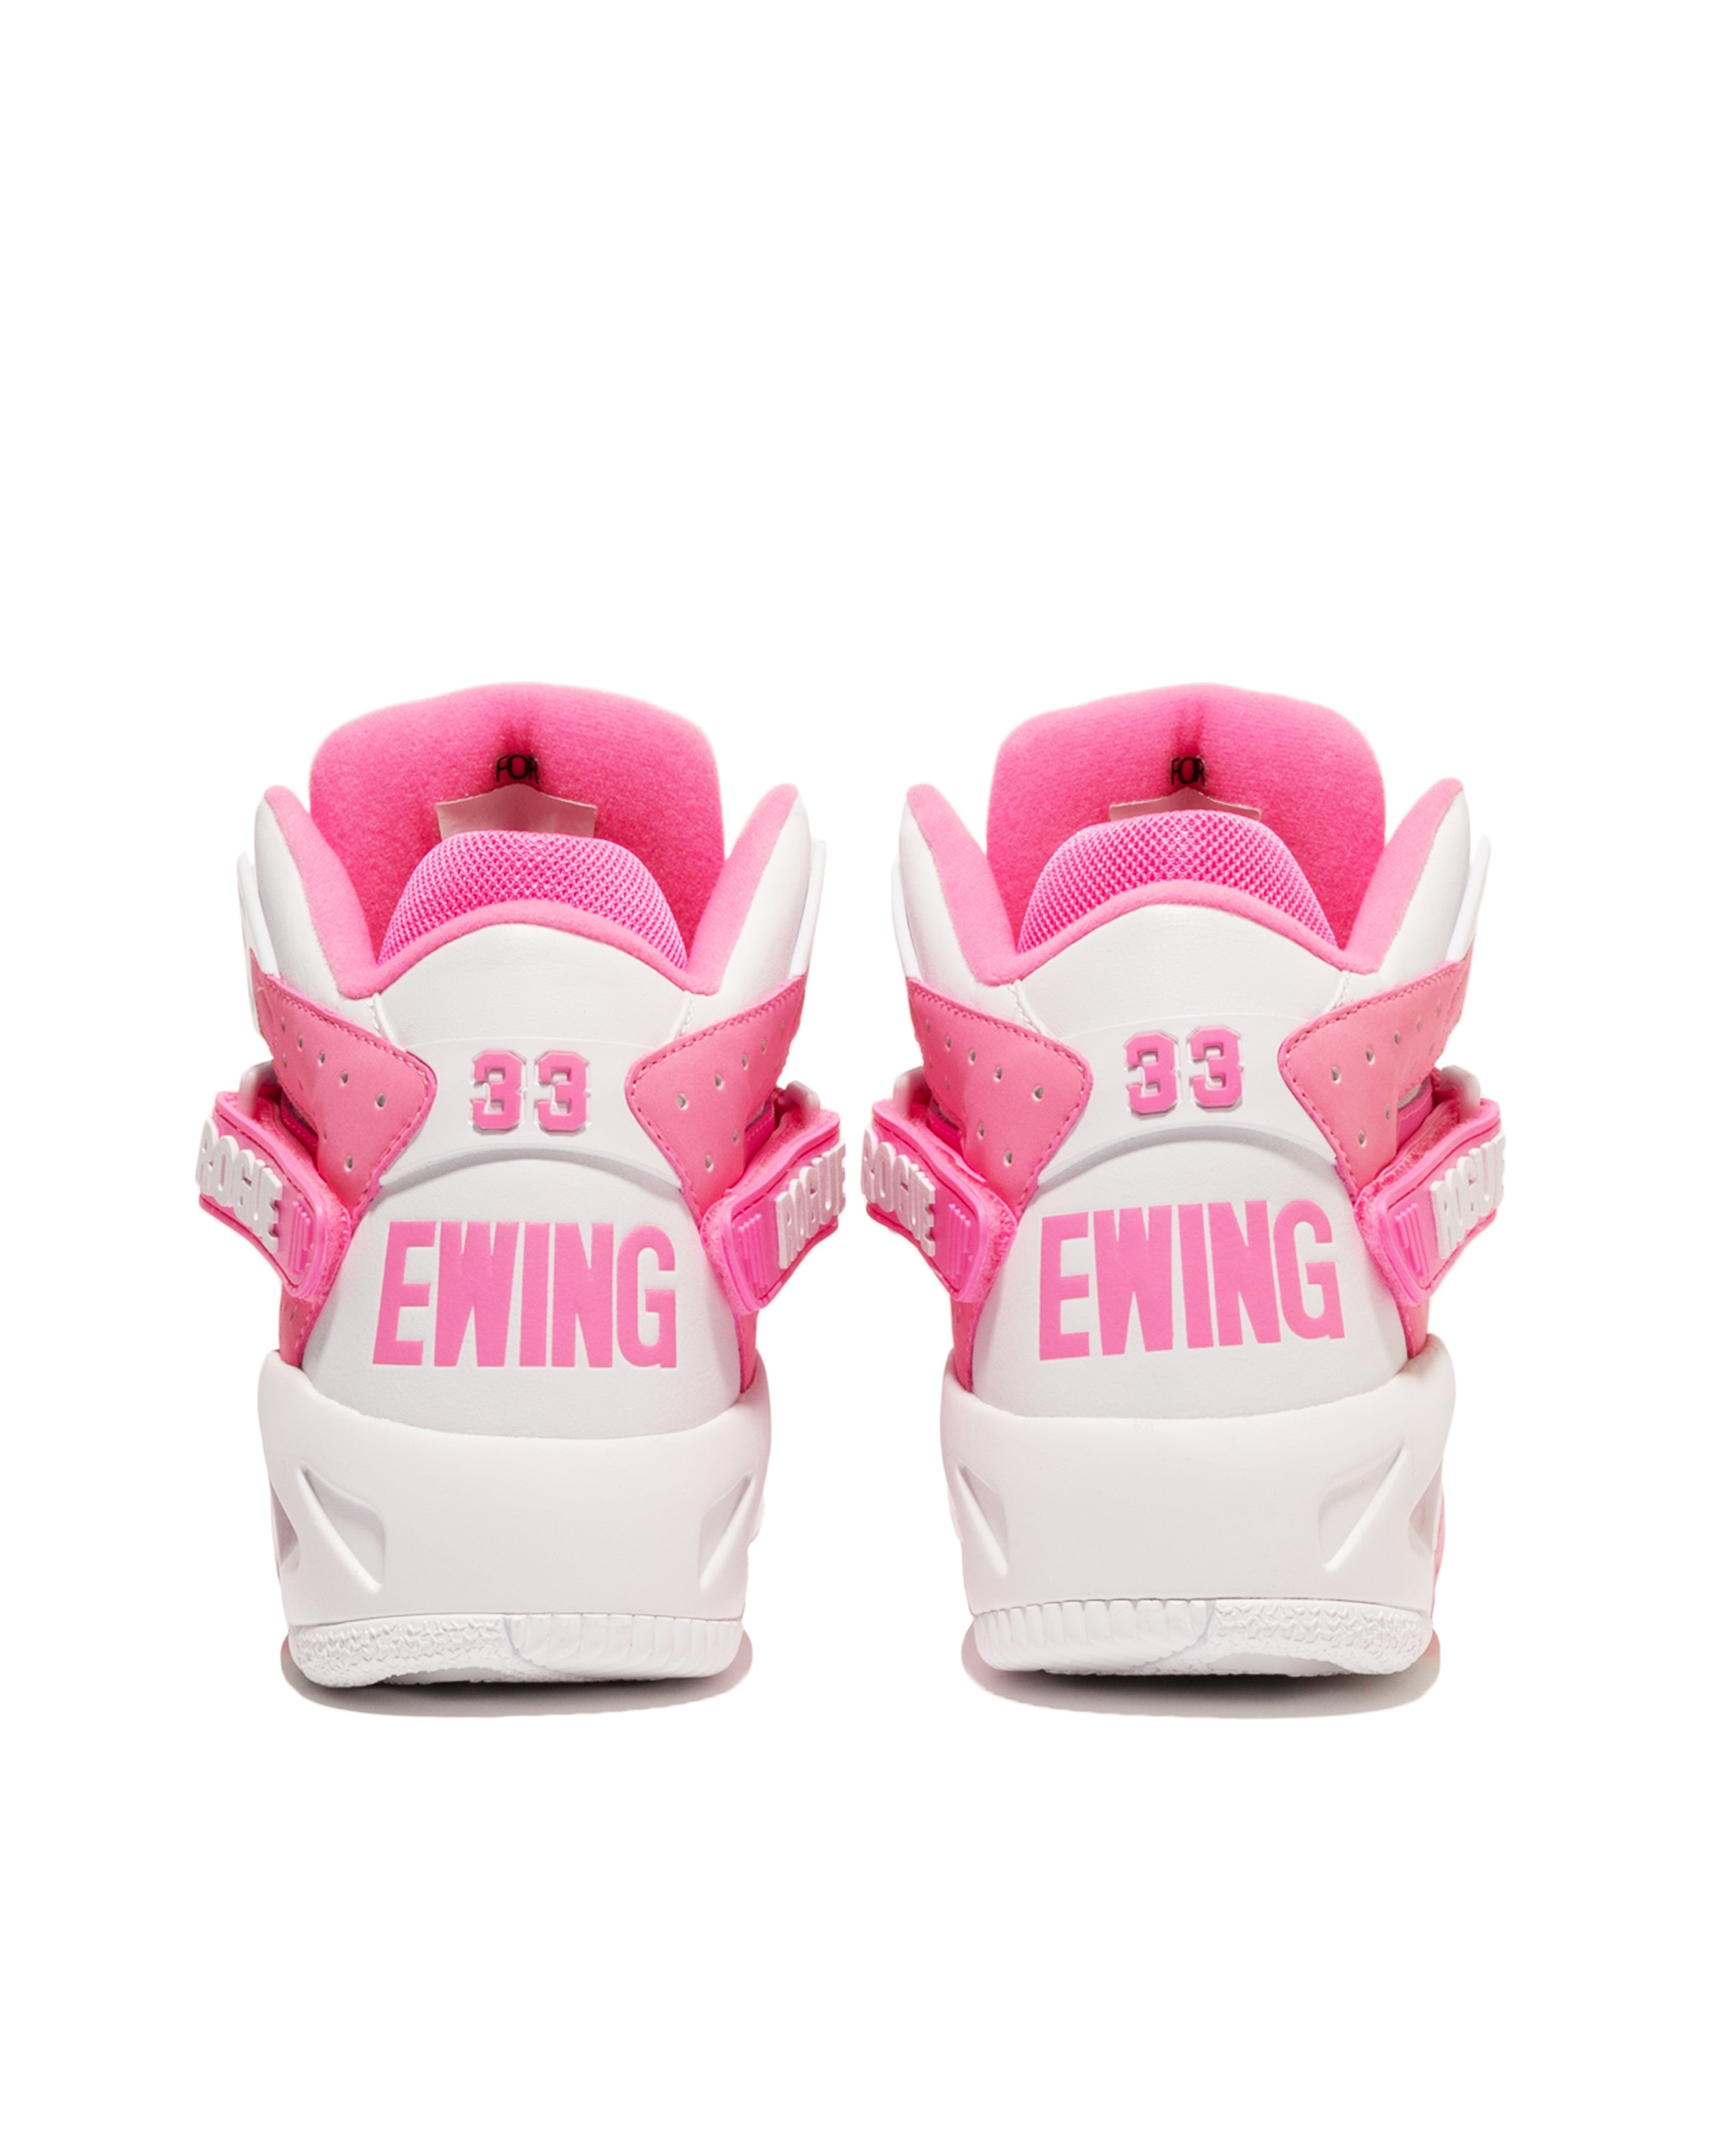 ROGUE White/Pink BREAST CANCER AWARENESS